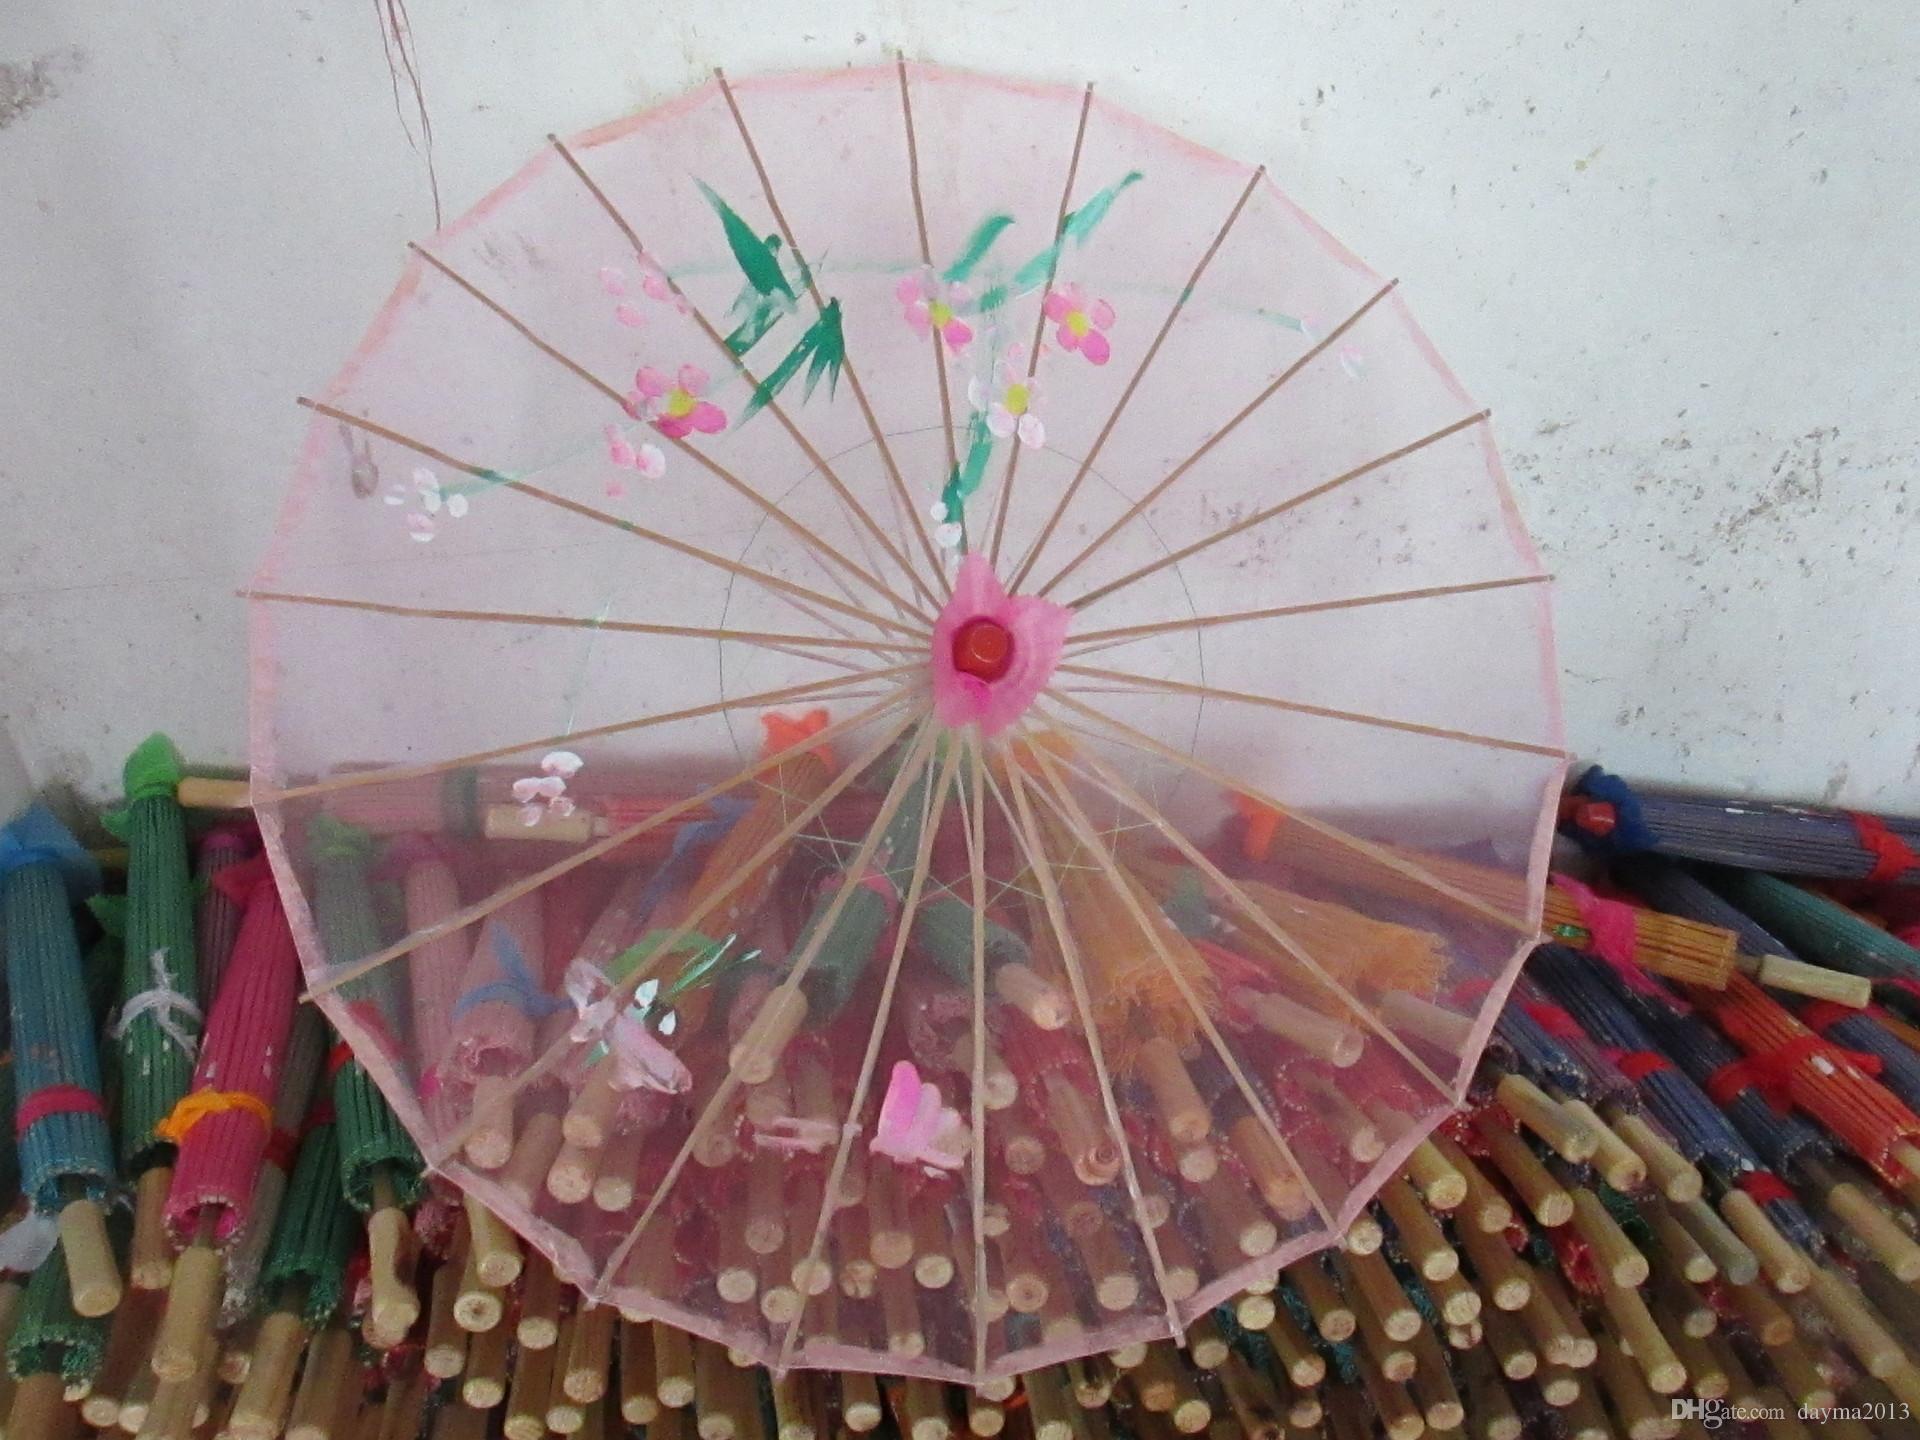 76cm diameter Popular Chinese style New arrival Wedding Party bamboo Umbrella Flower Transparent gauze umbrella dance umbrella bamboo